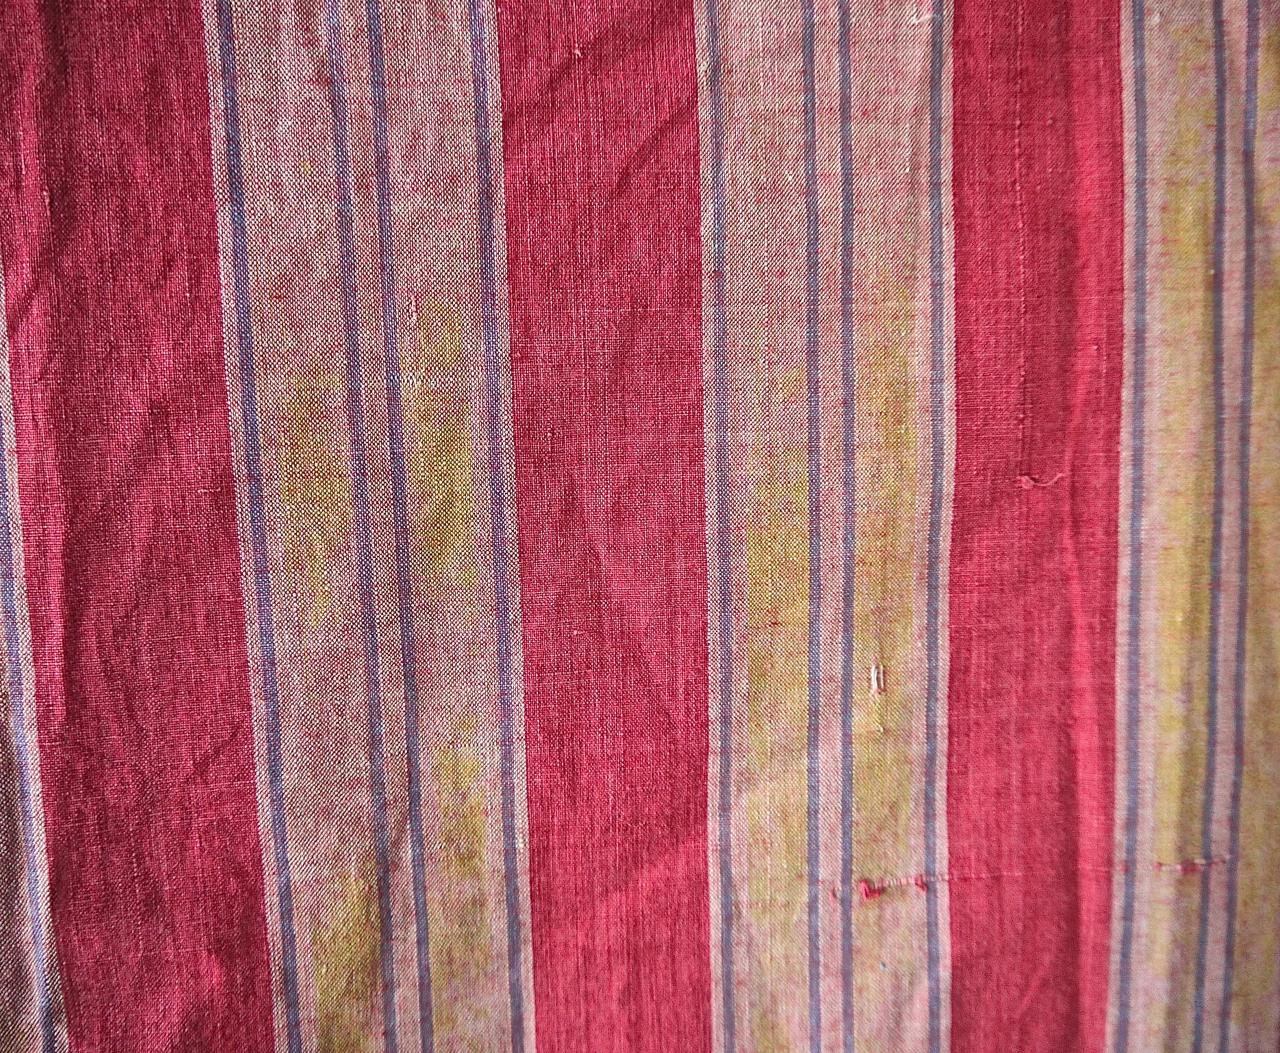 French Provincial Two Red Striped Large Cotton Curtains, French, Late 18th Century For Sale